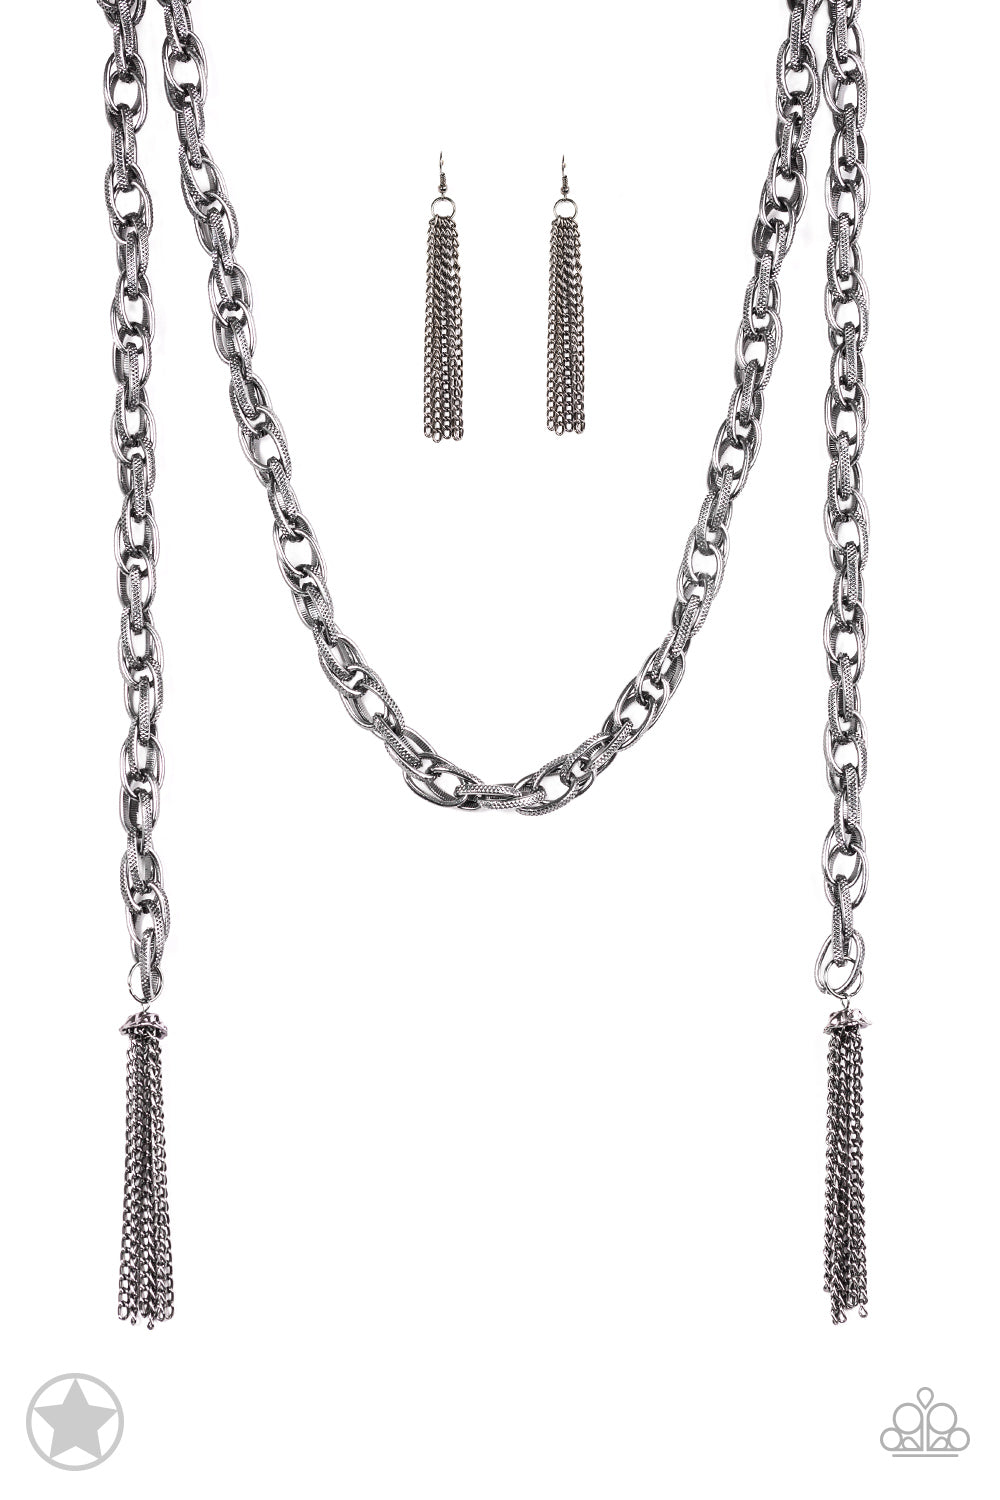 SCARFed for Attention Necklace - Gunmetal